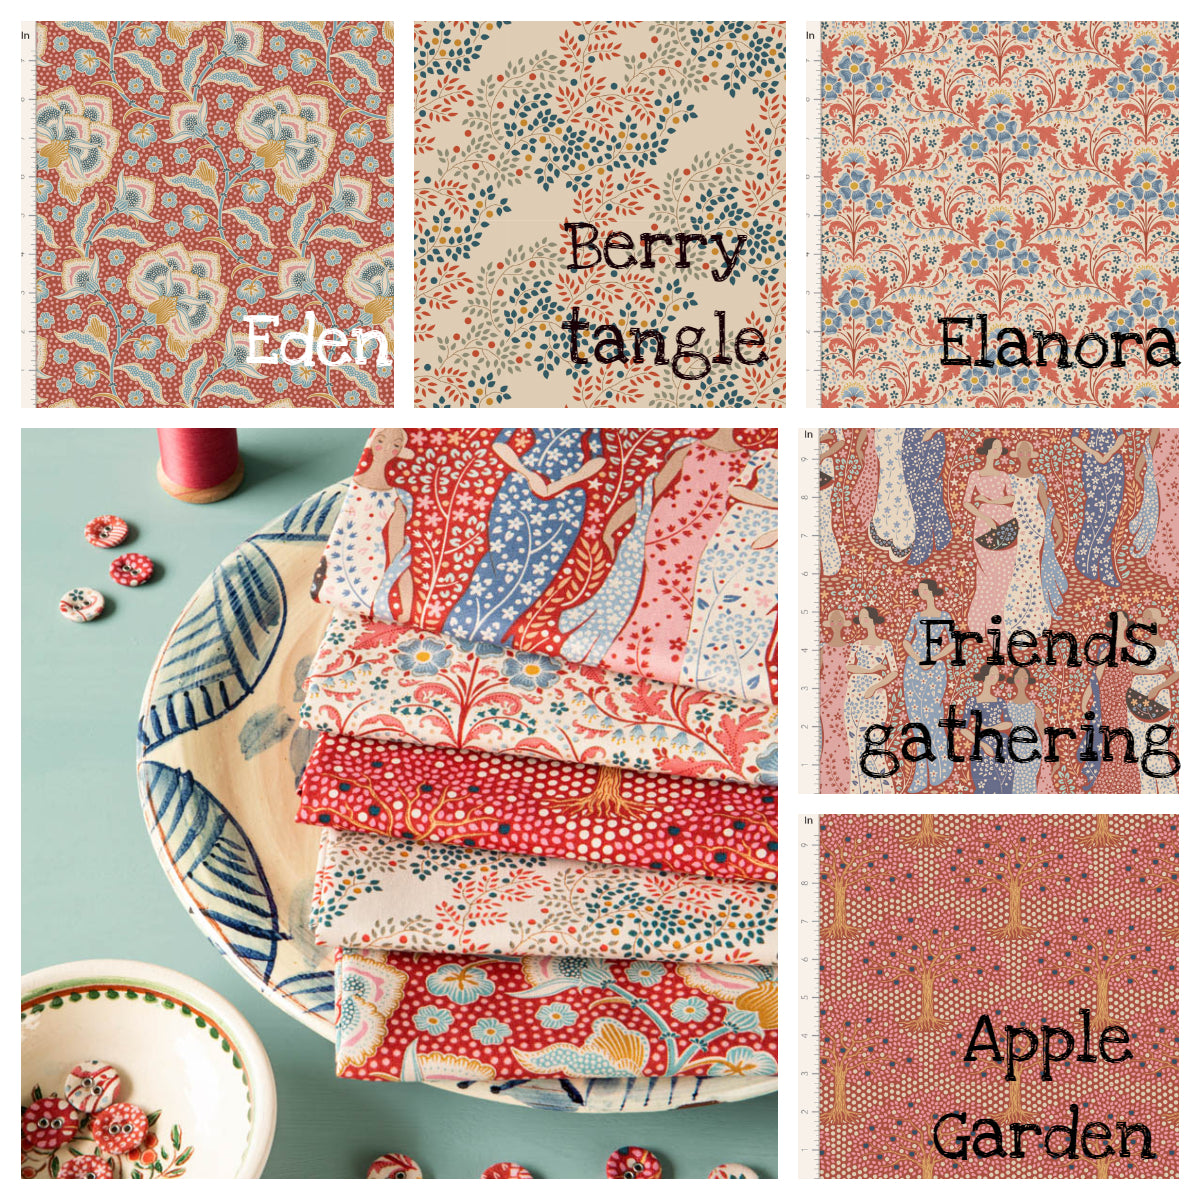 Tilda Hometown fabrics by the Fat quarter - cotton quilting fabric. Rust